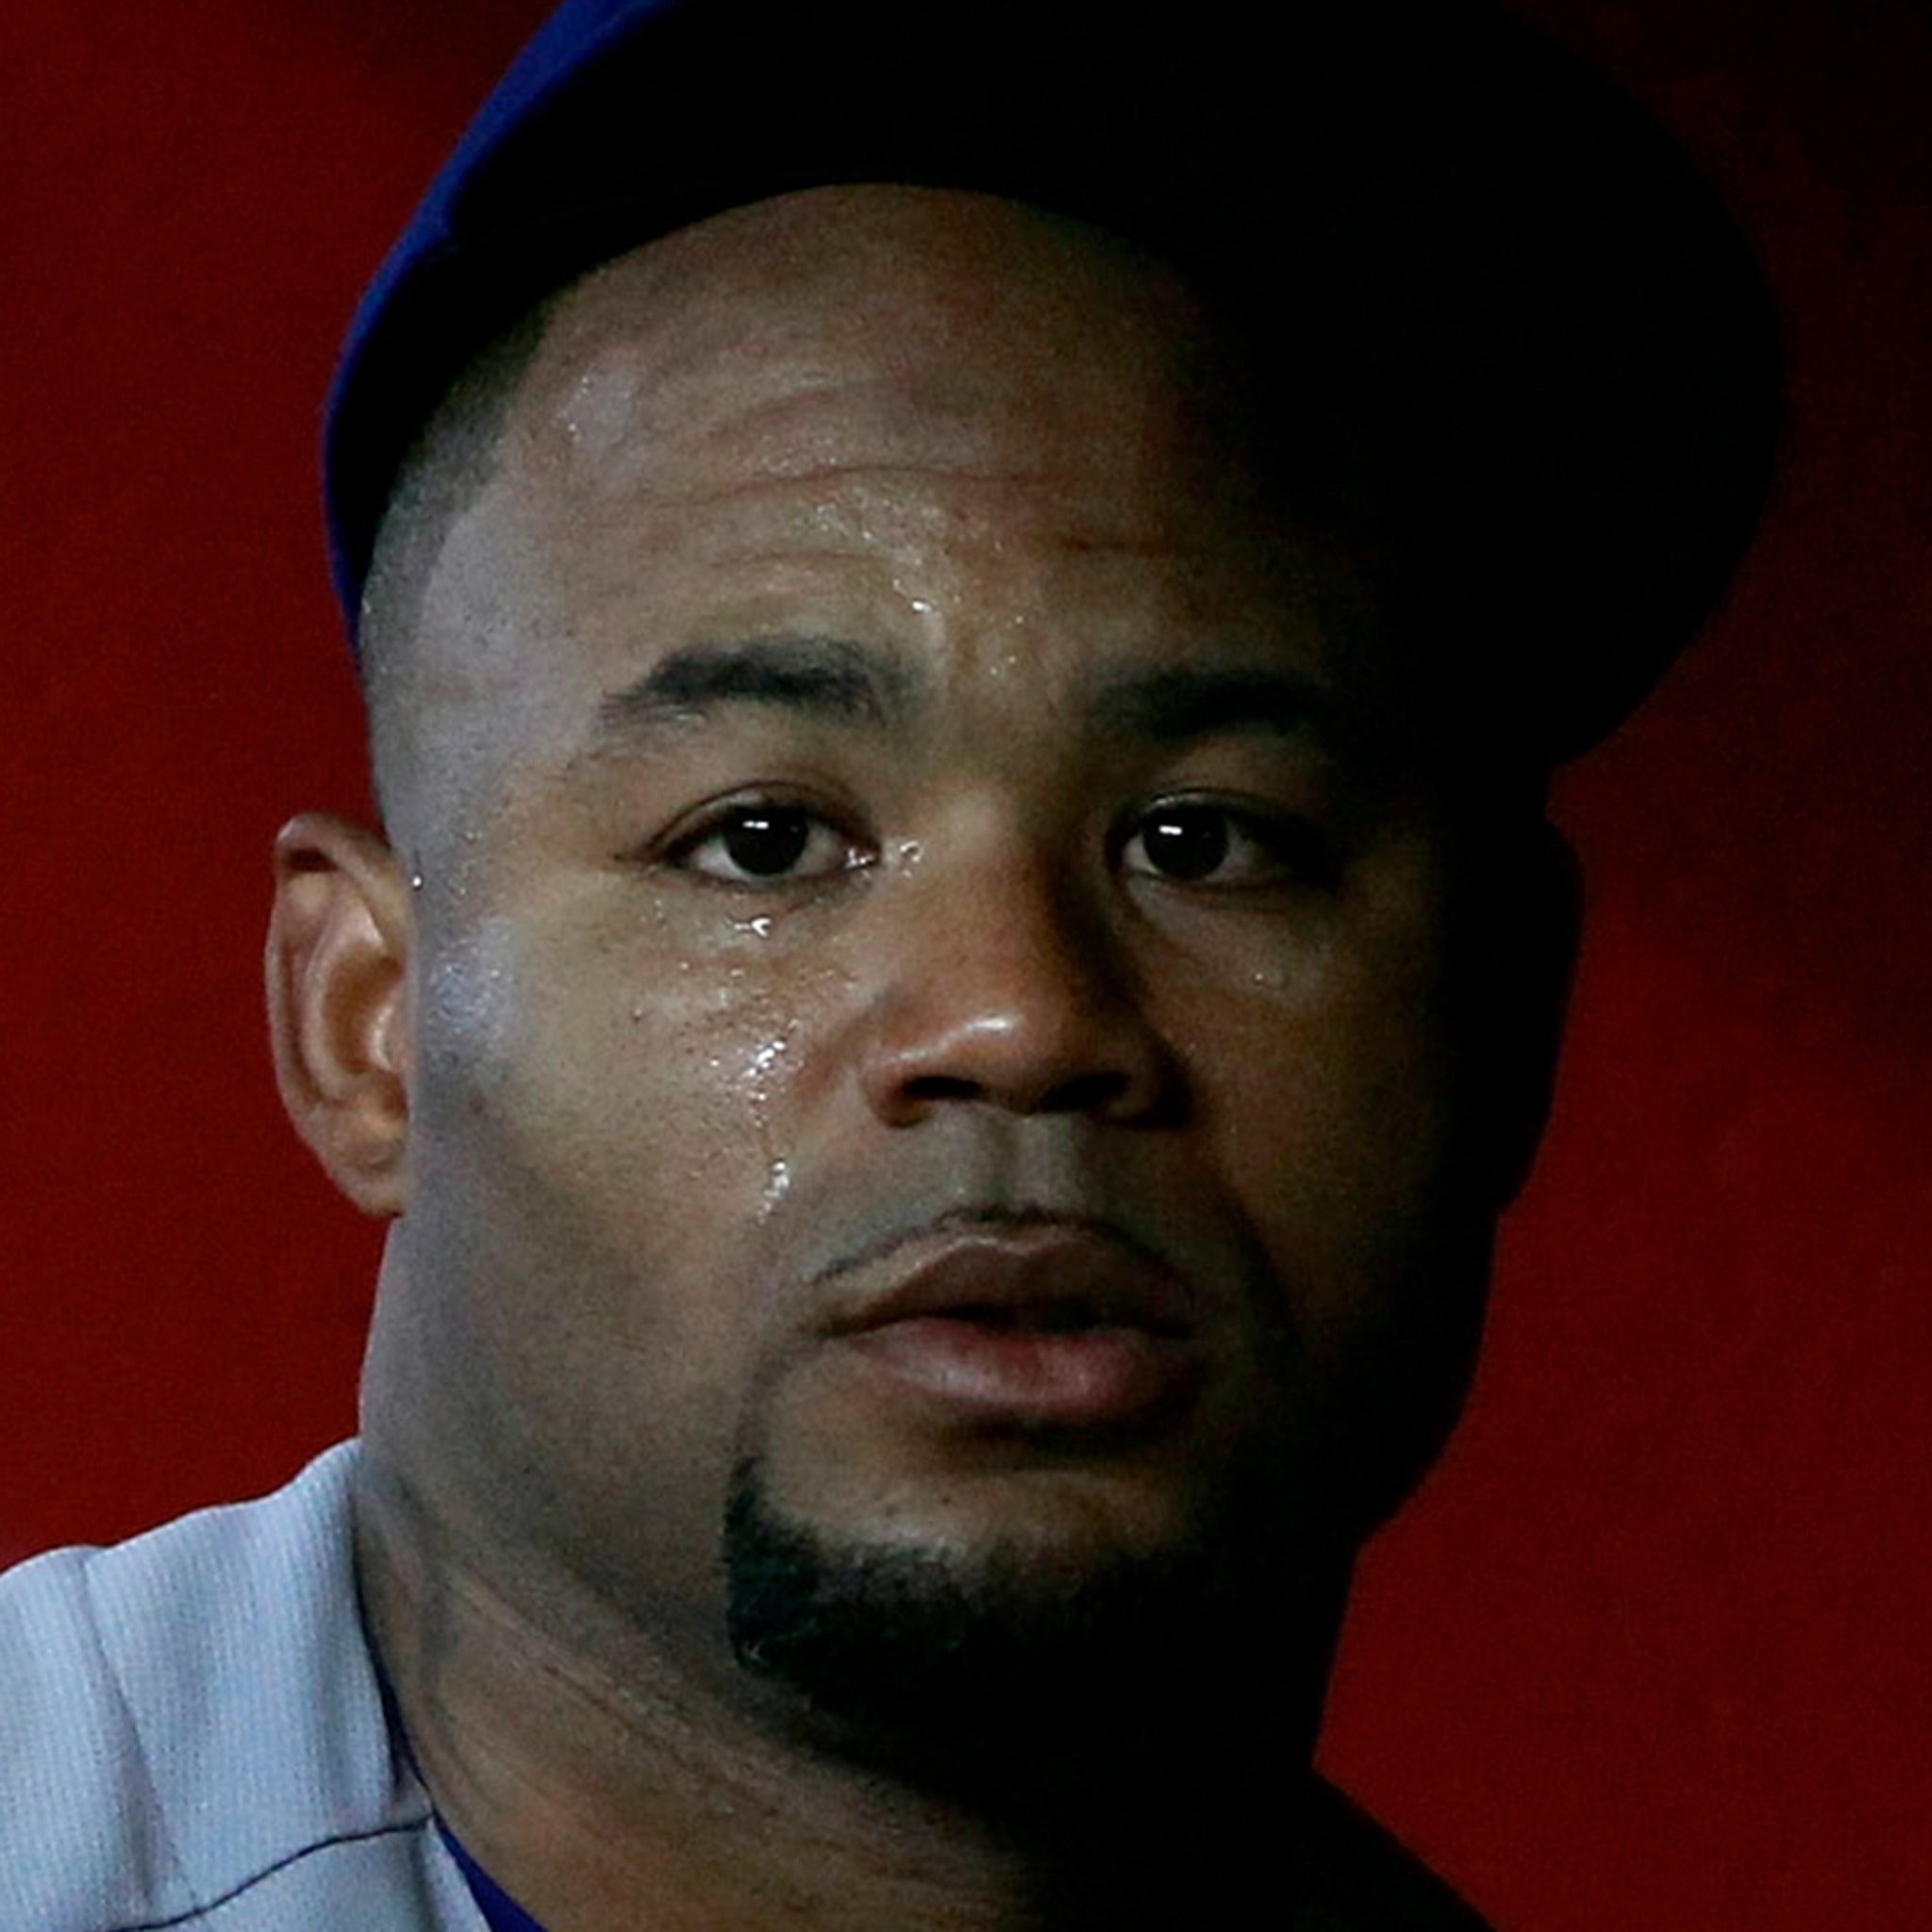 Woman and 5-Year-Old Boy Drown in Pool at Home of MLB's Carl Crawford